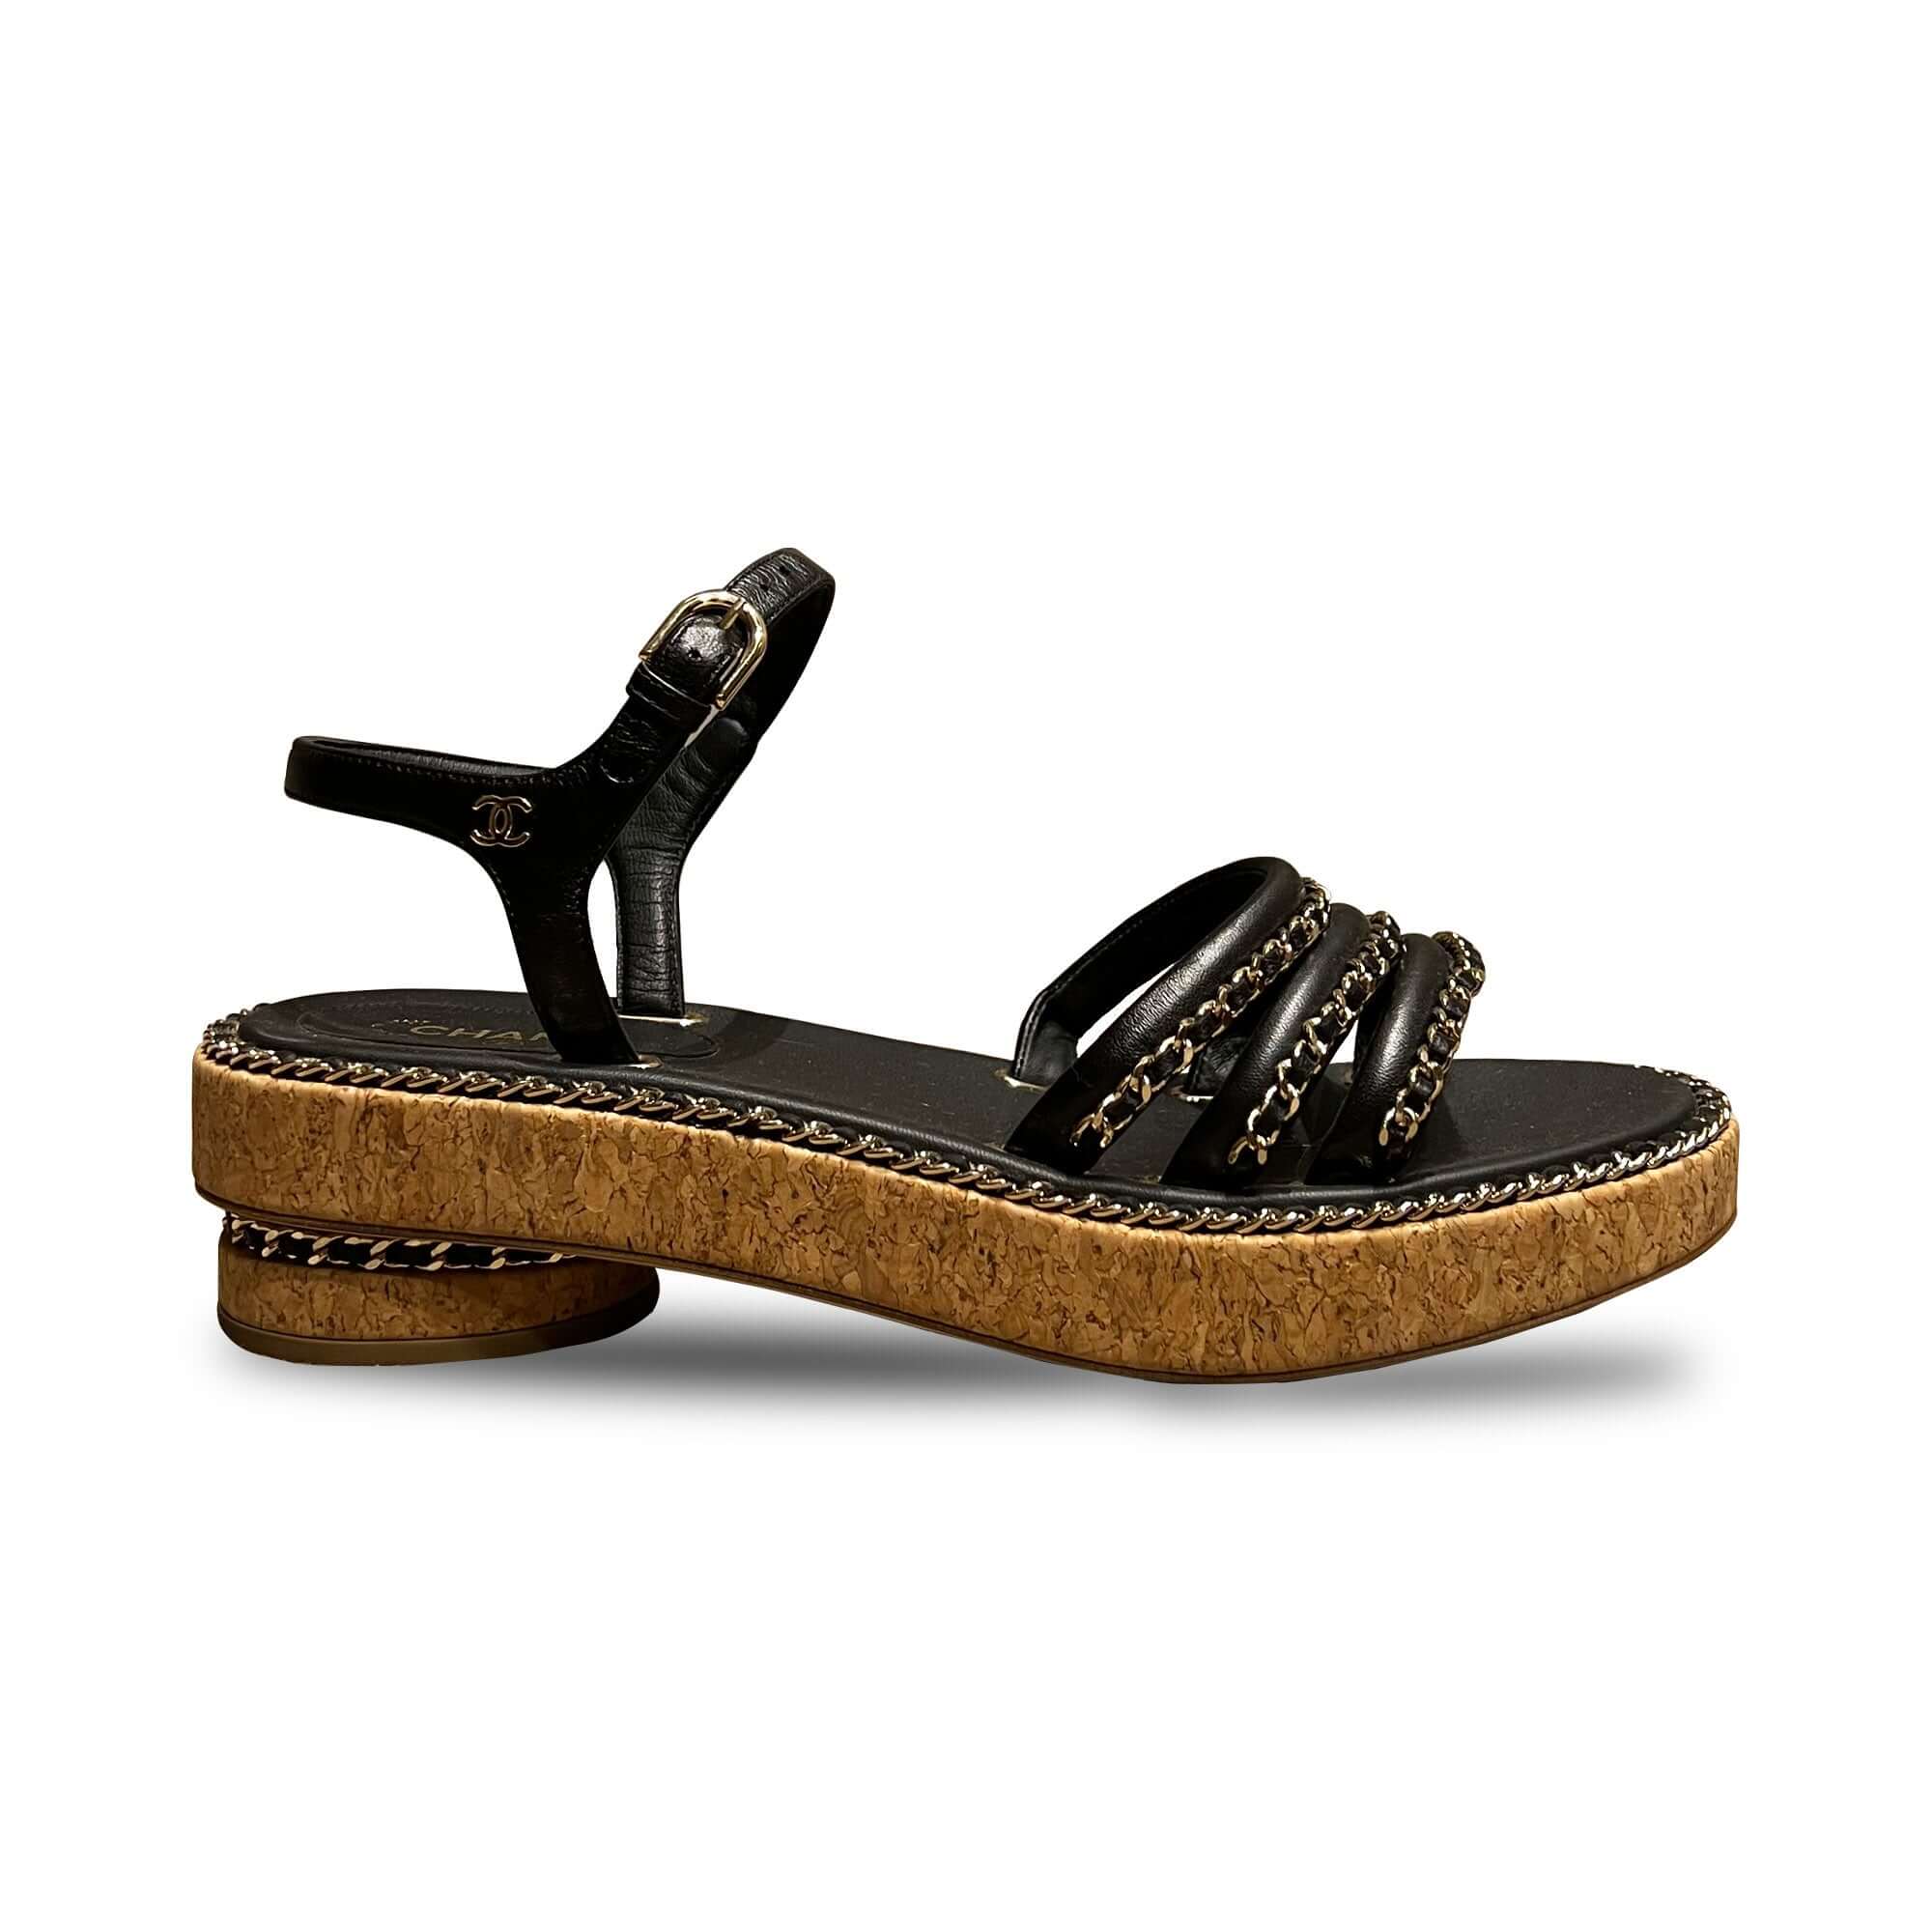 Chanel black chain leather sandals